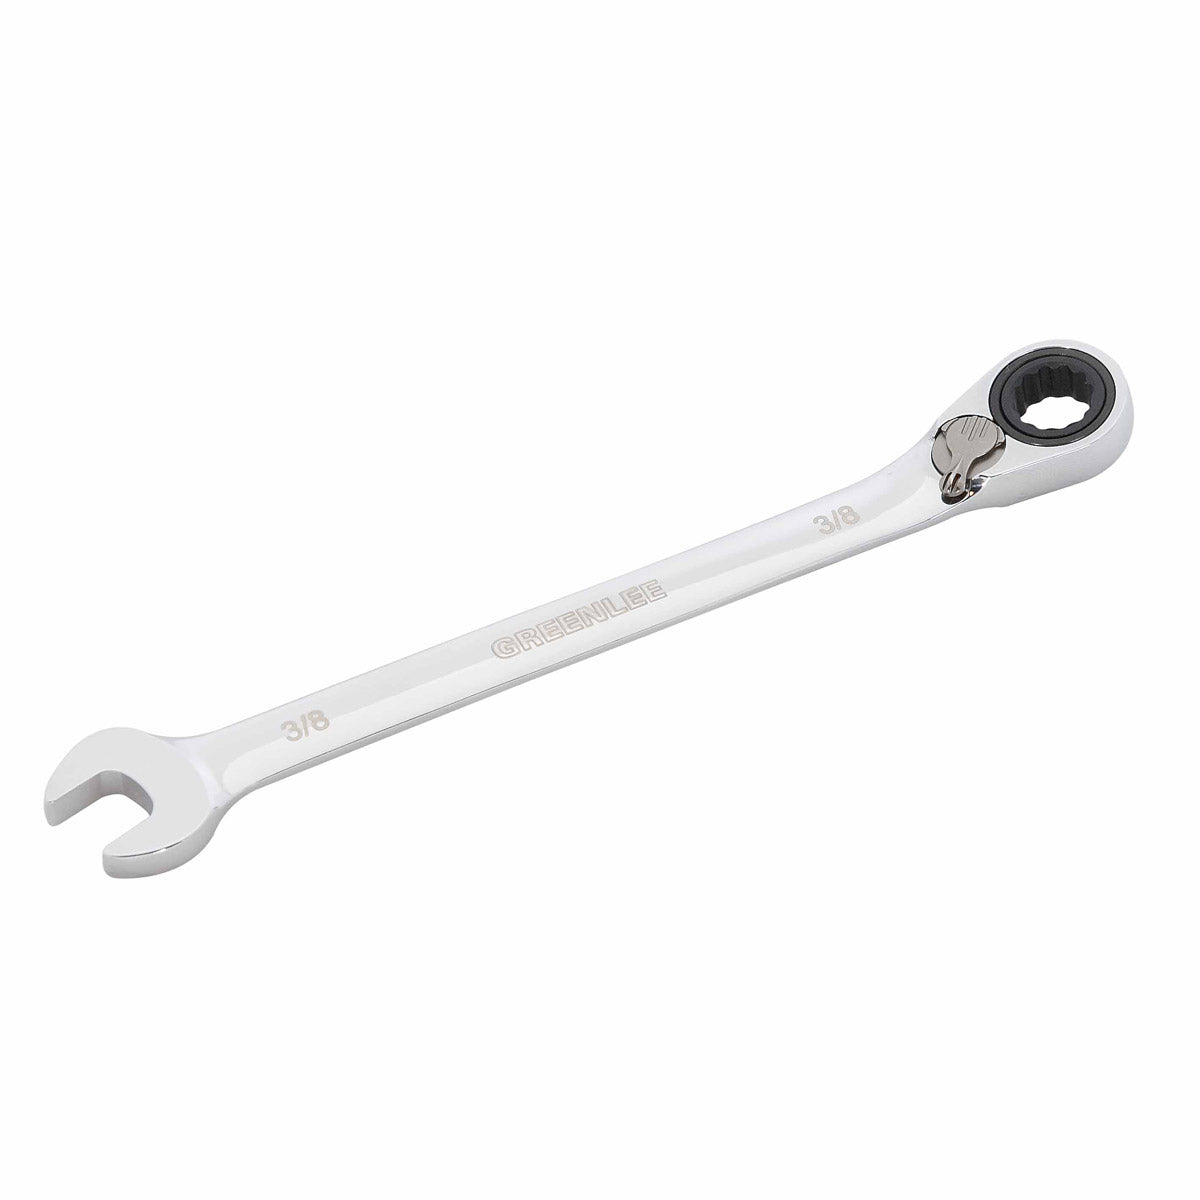 Greenlee 0354-13 Combination Ratcheting Wrench 3/8"